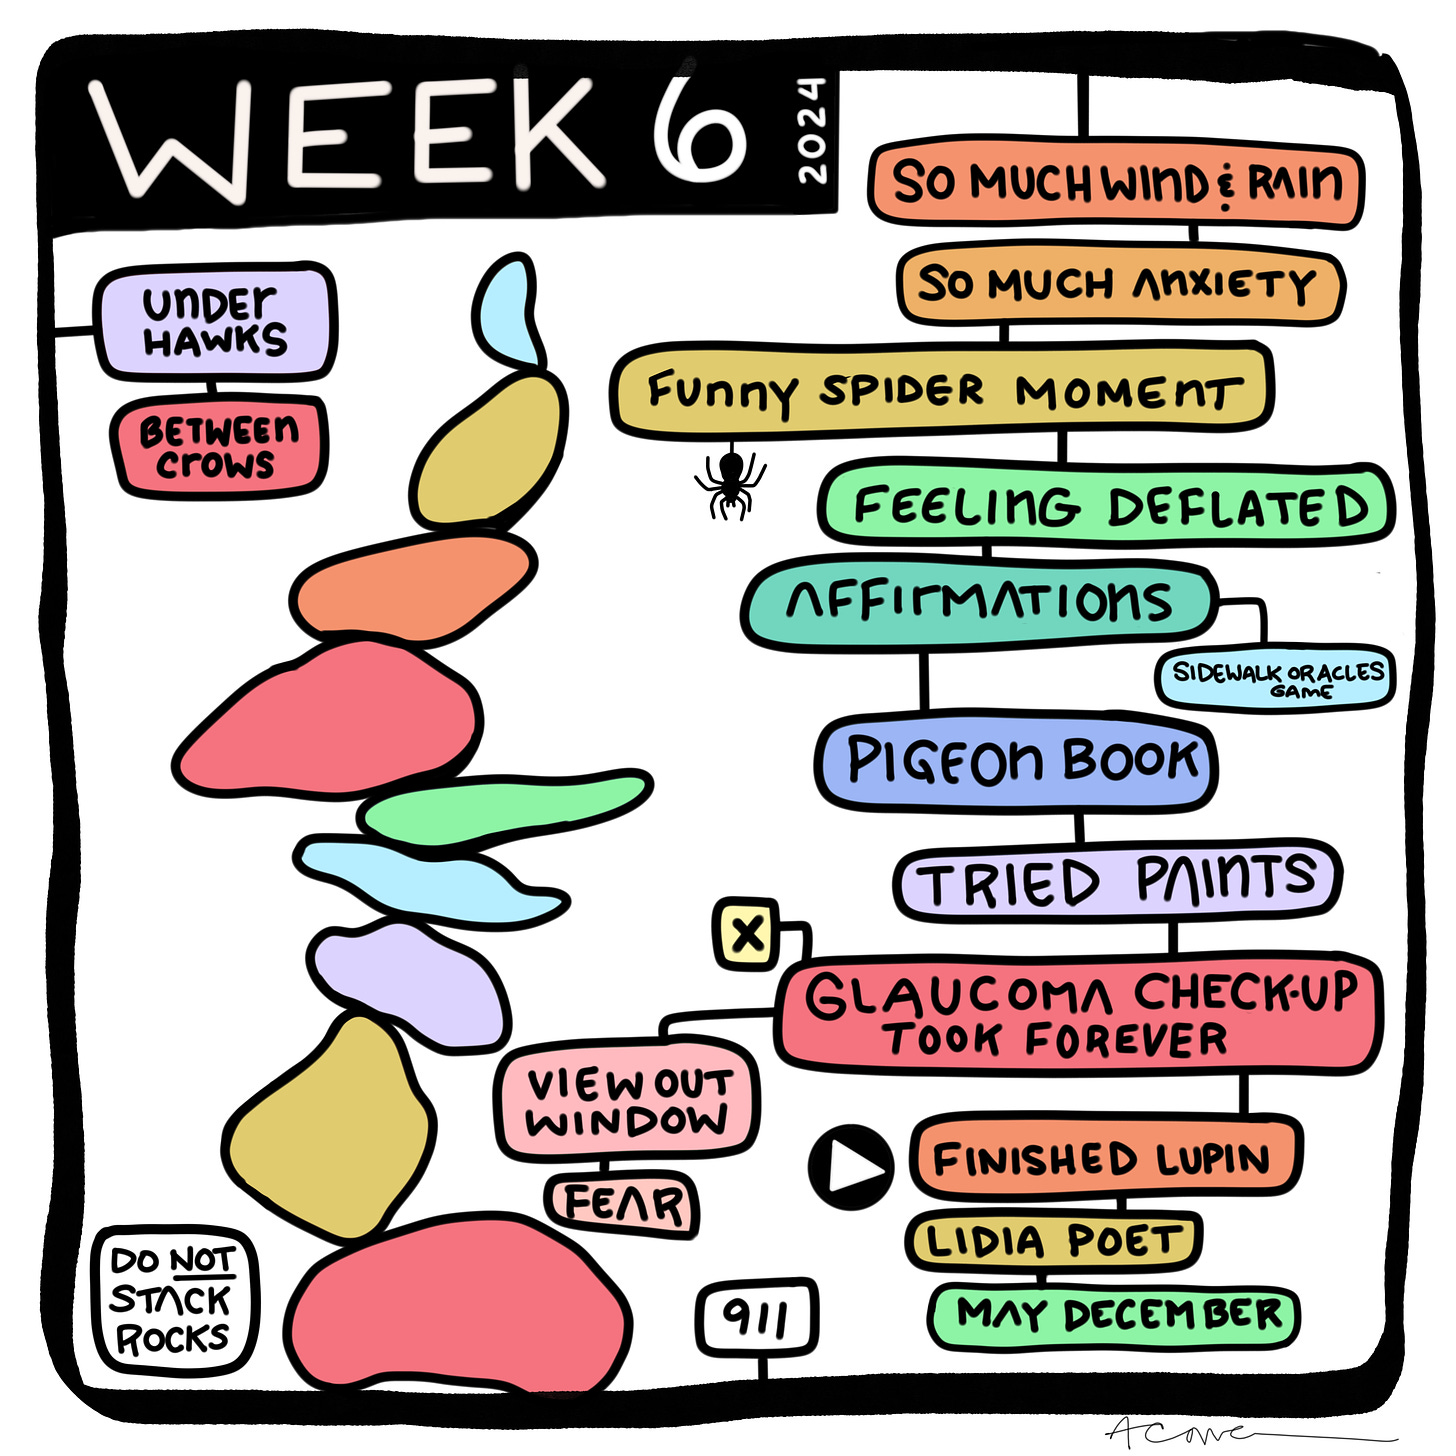 Week 6 list comic with cairn 